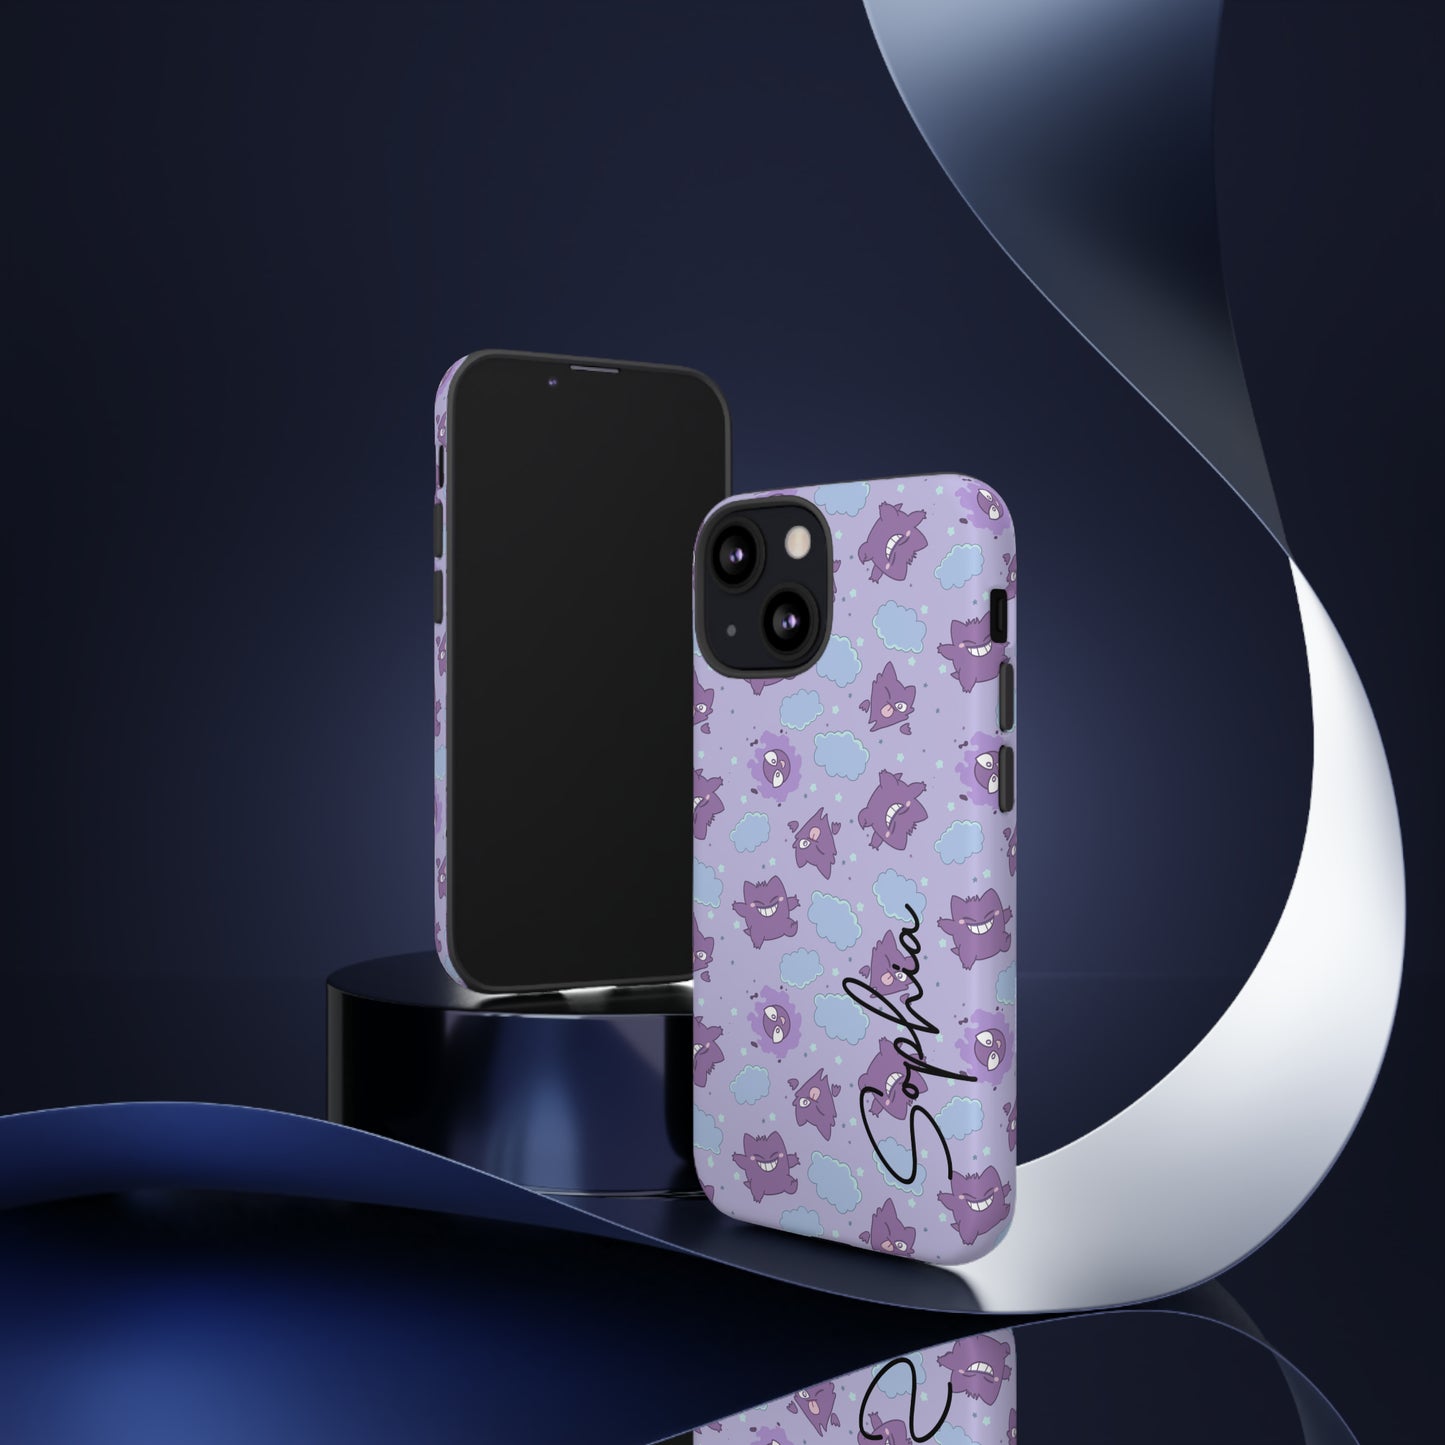 Ghost Pokemon Tough Phone Case for Iphones, Samsungs, and Google phones